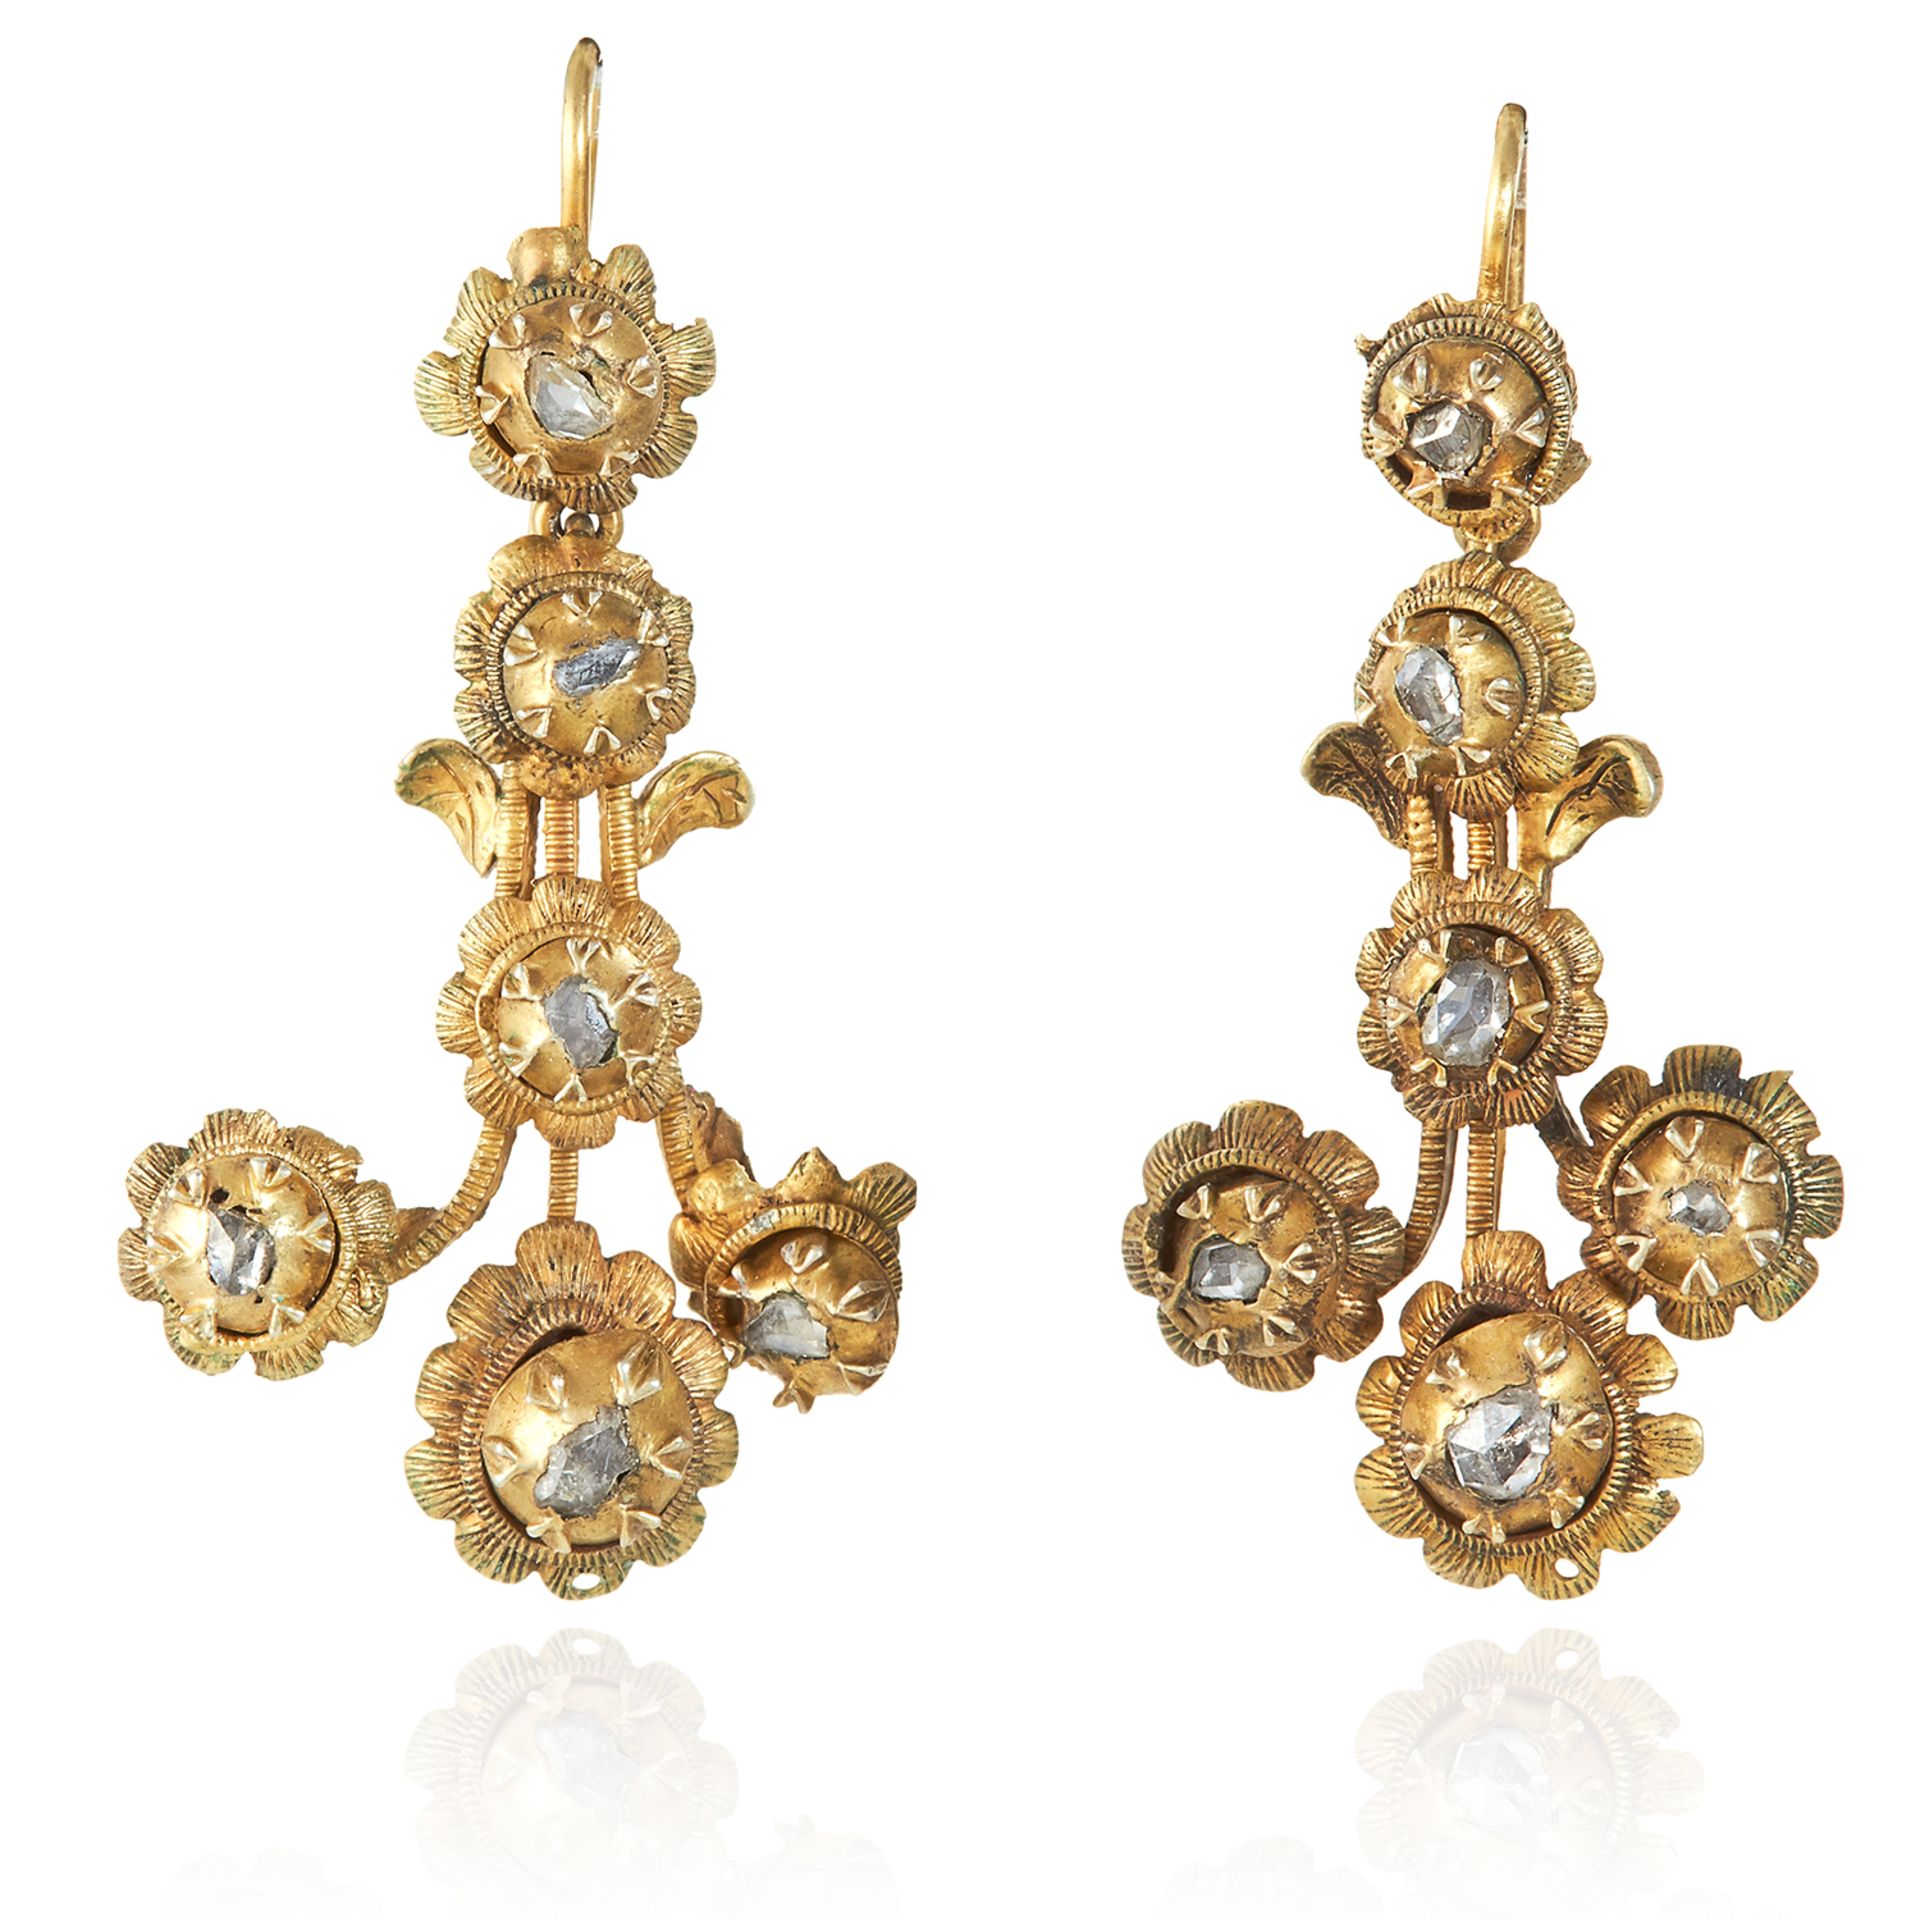 A PAIR OF ANTIQUE DIAMOND EARRINGS, 19TH CENTURY in high carat yellow gold, the fleur-de-lys style